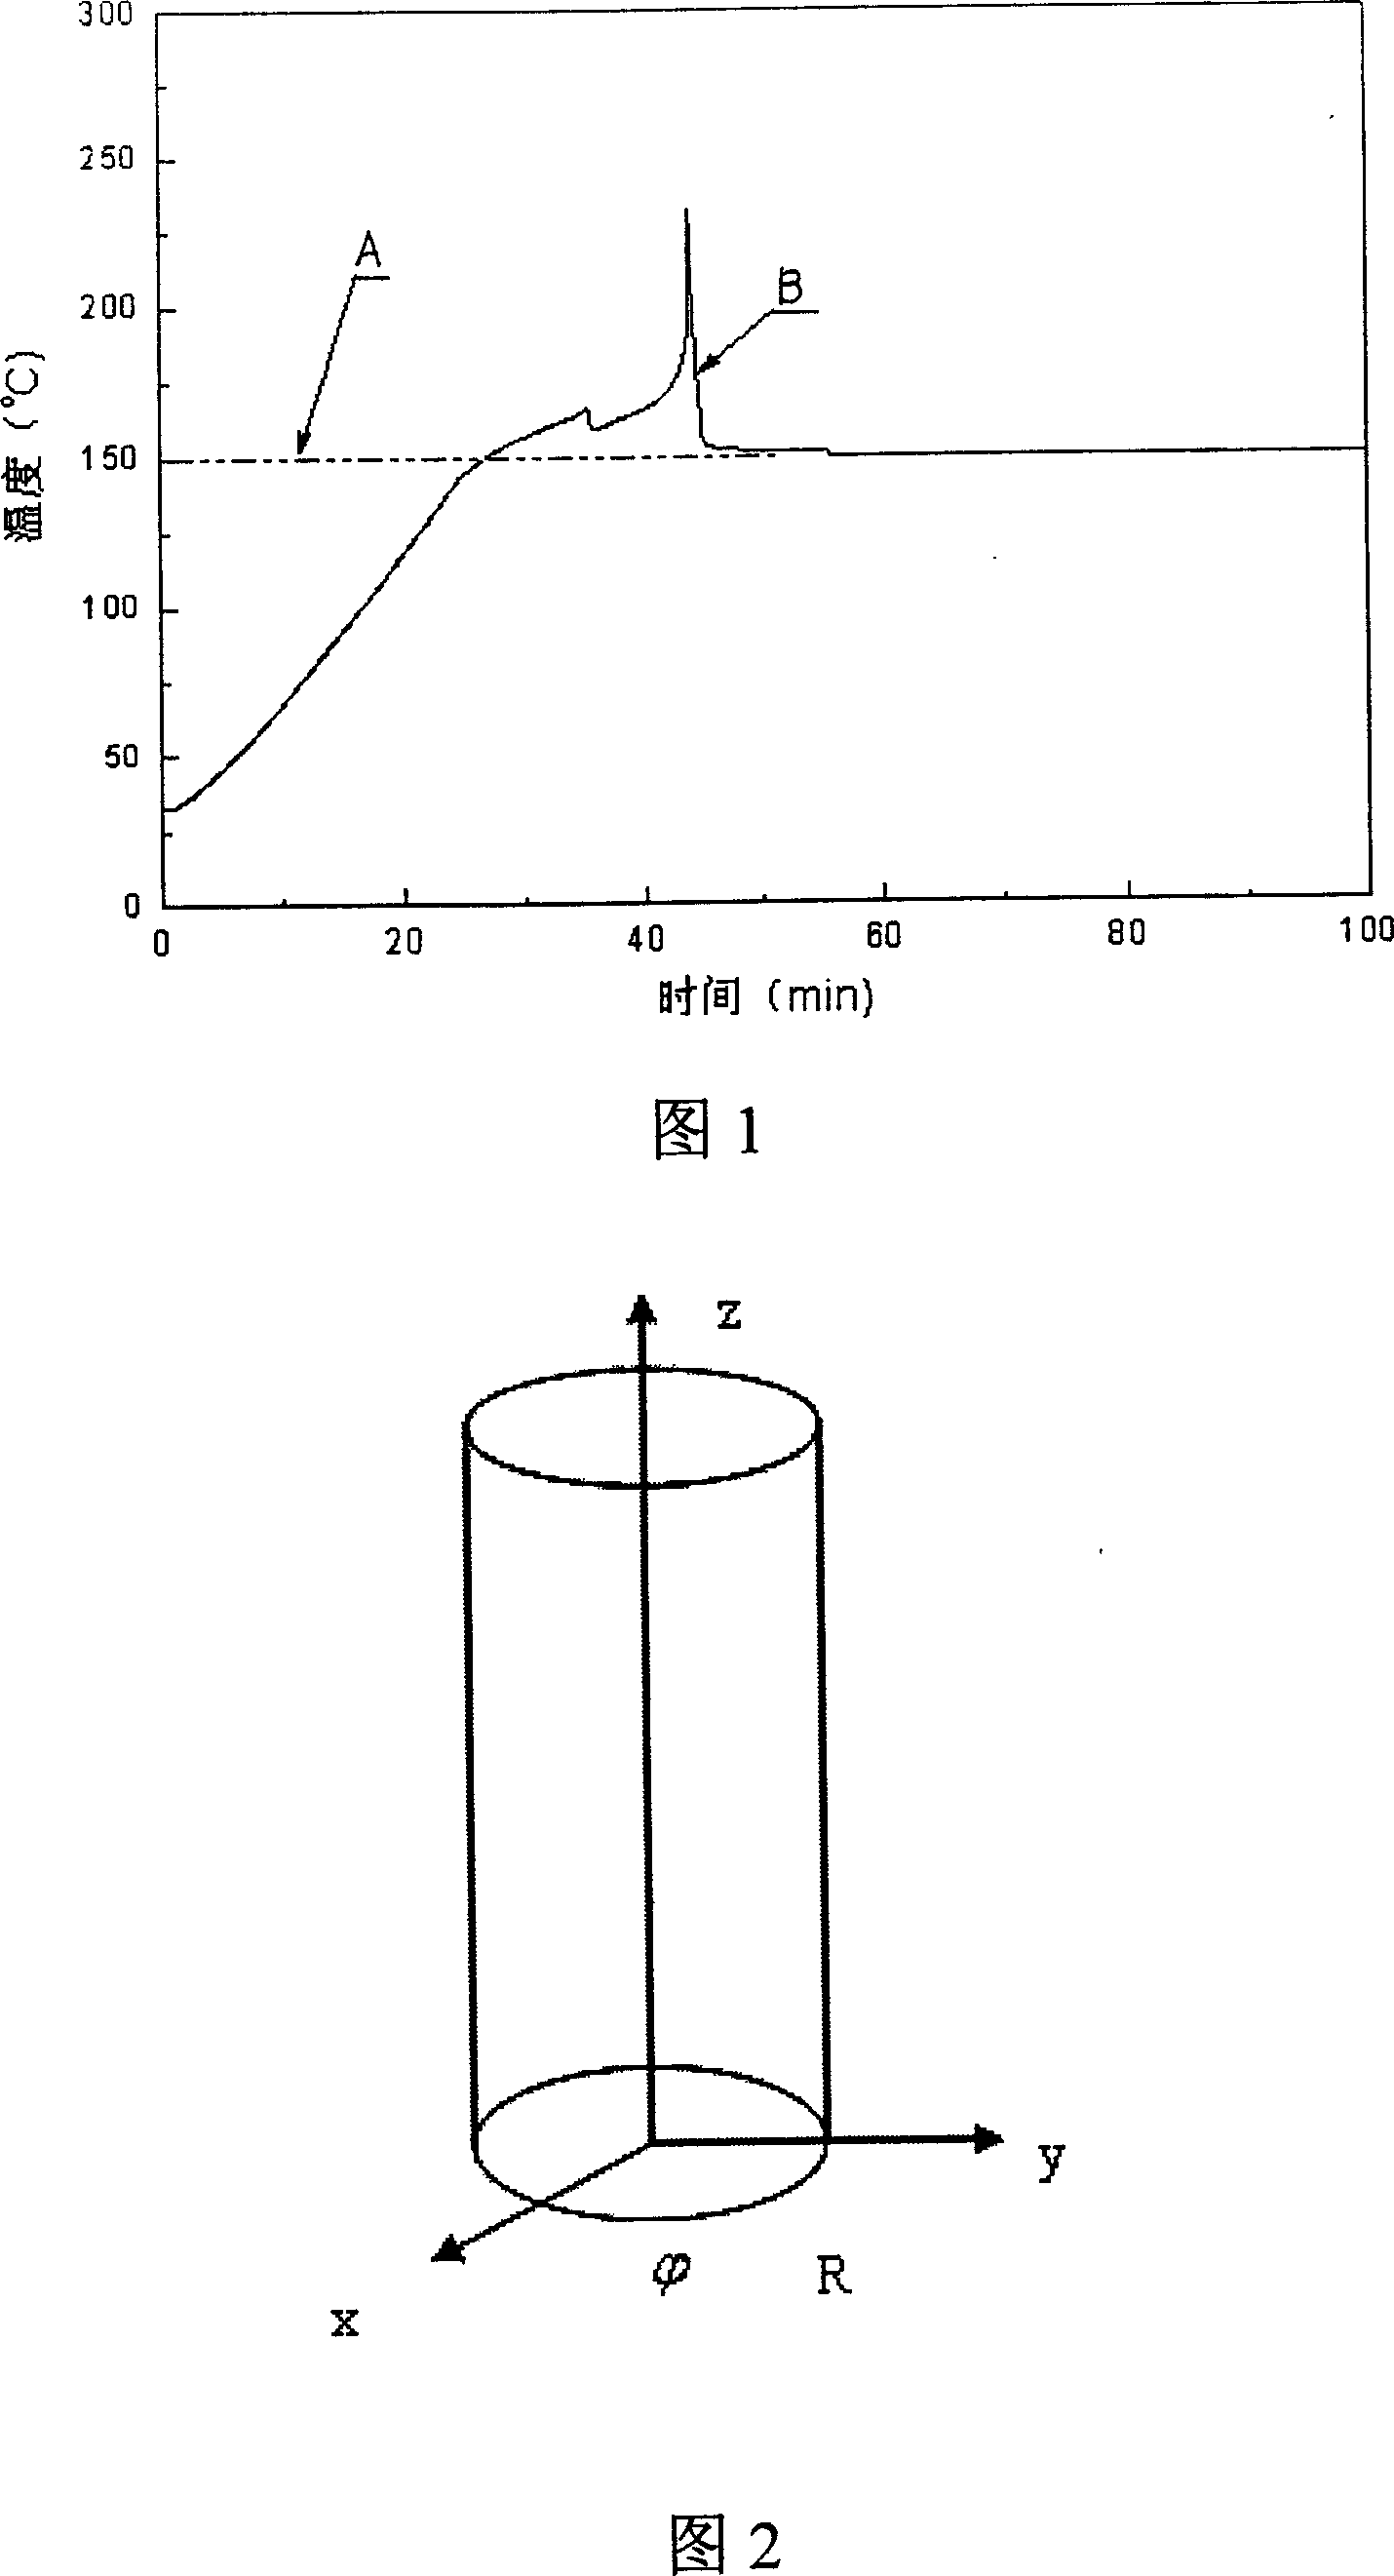 Predicting method for lithiumion cell heat safety performance